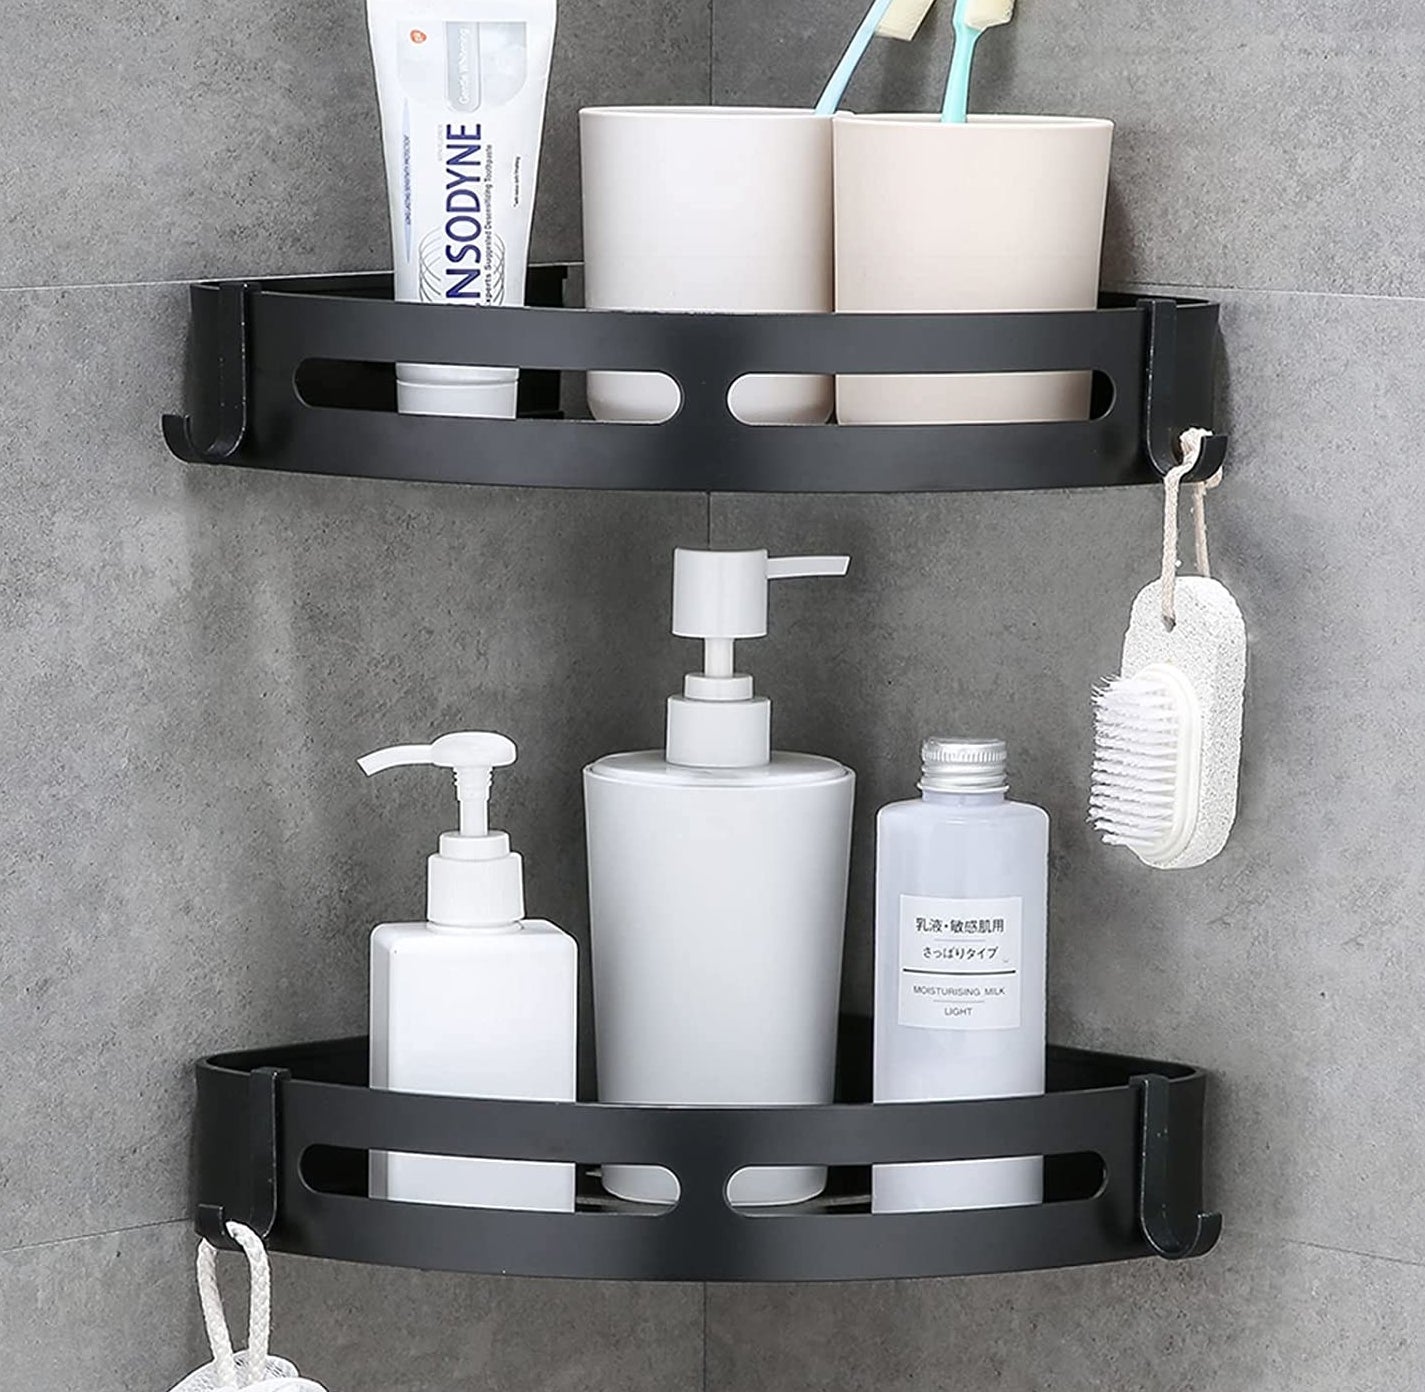 Two shelves in the corner of a shower with products on them